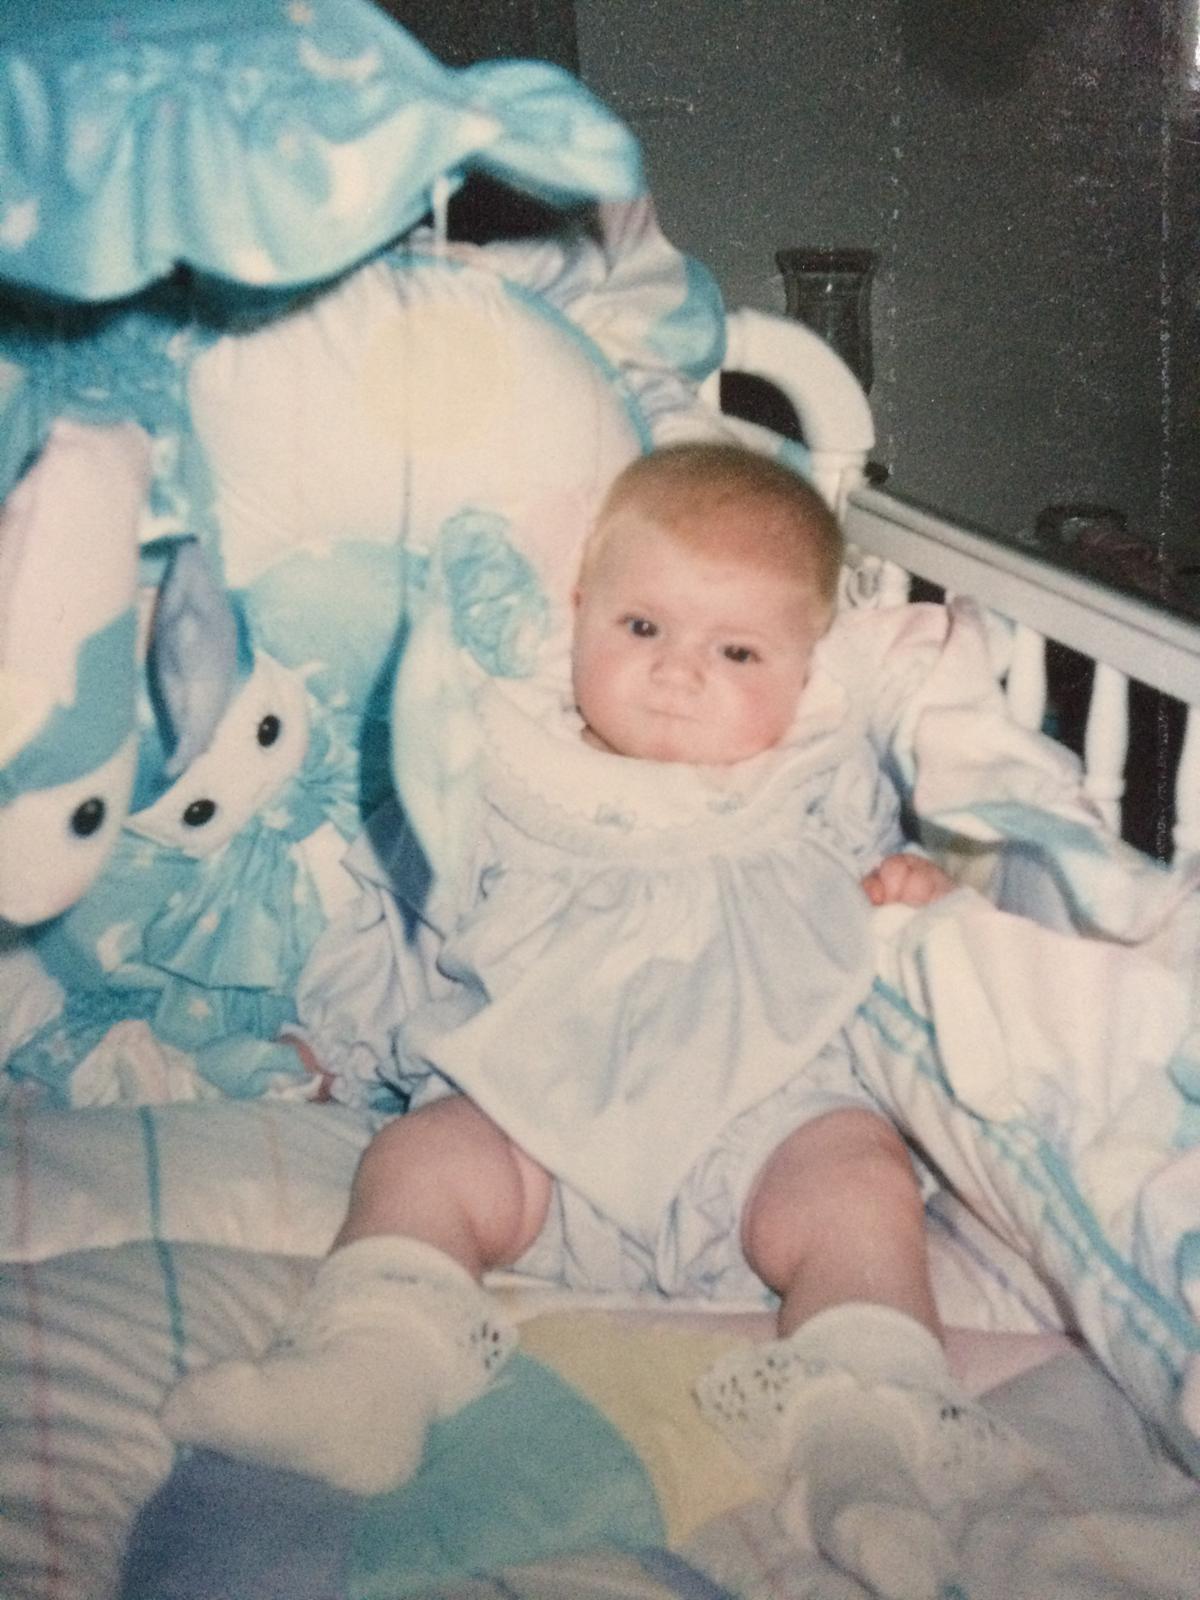 Morgan Hill, who was named Baby Mary Grace by her rescuers after they found her in a dumpster behind Hoffmann Estates Medical Center in October 1995. (Courtesy of <a href="https://thestoryofbabymarygrace.com/">Morgan Hill</a>)